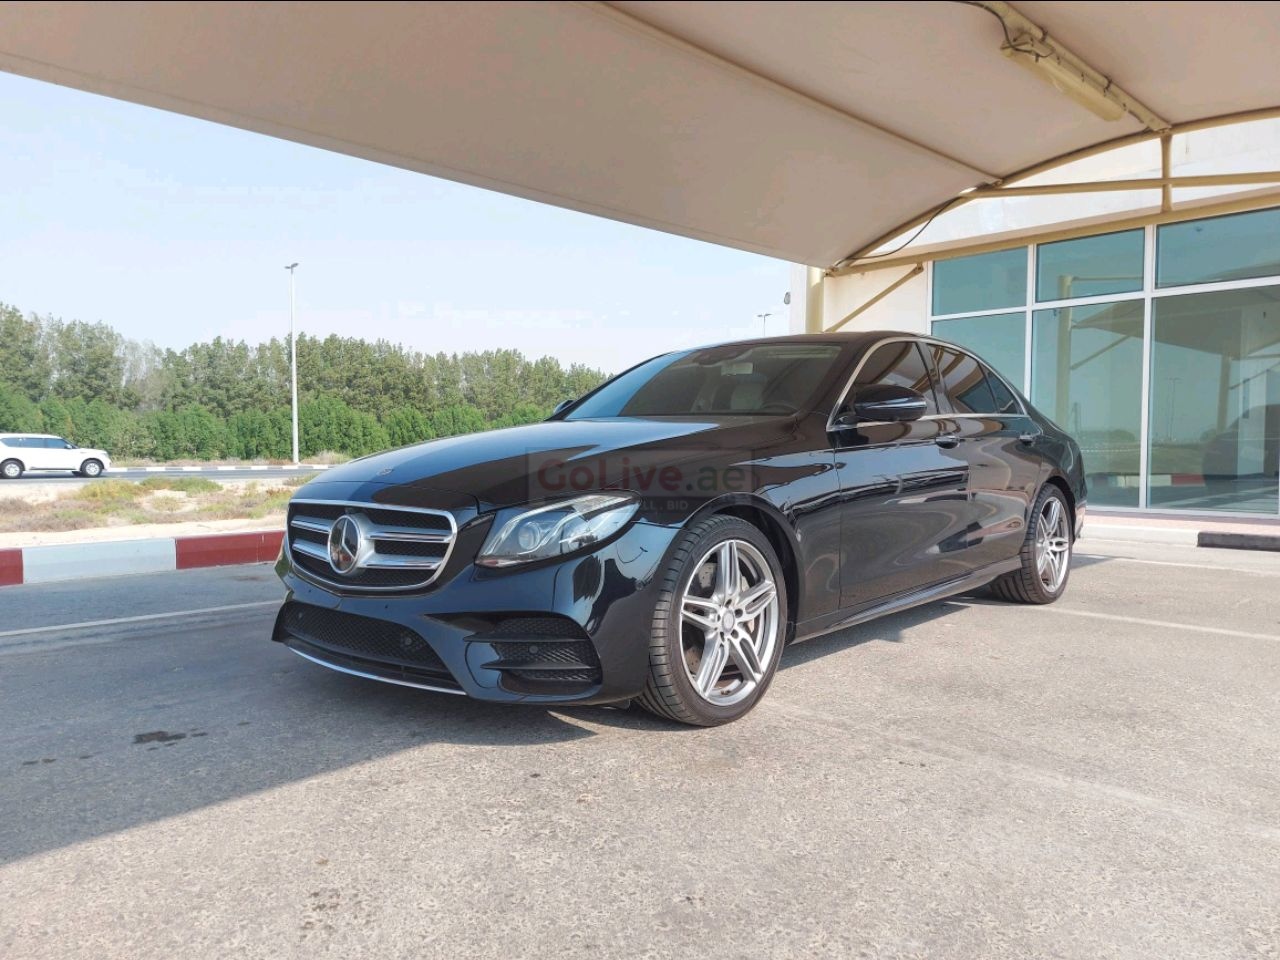 Mercedes Benz E-Class 2017 AED 155,000, GCC Spec, Good condition, Full Option, Sunroof, Fog Lights, Negotiable, Full Service